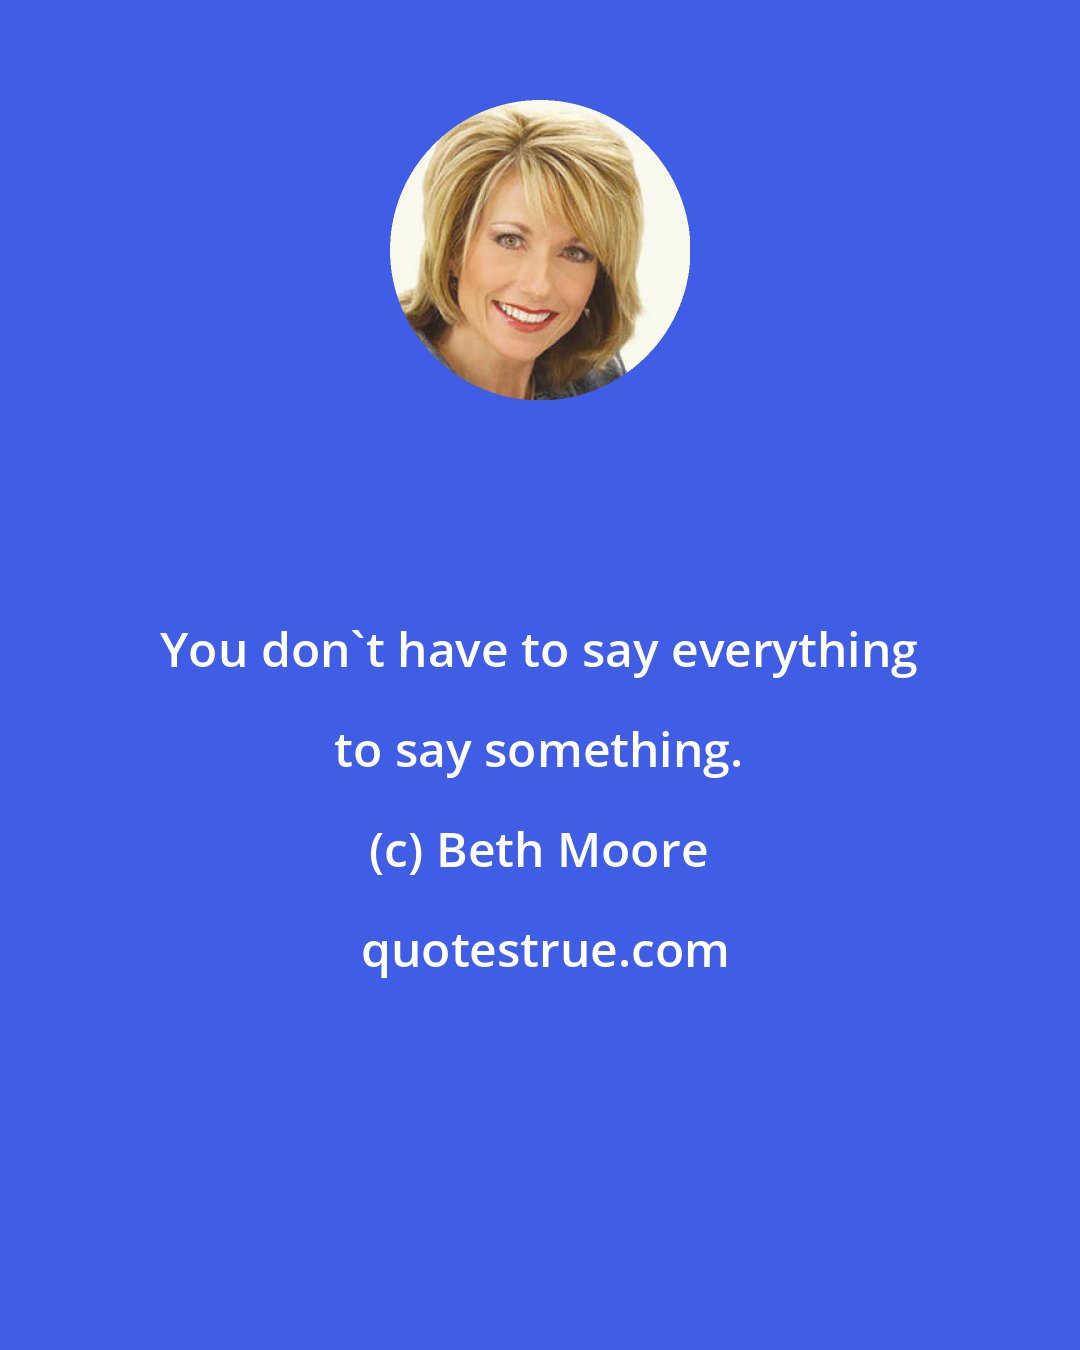 Beth Moore: You don't have to say everything to say something.